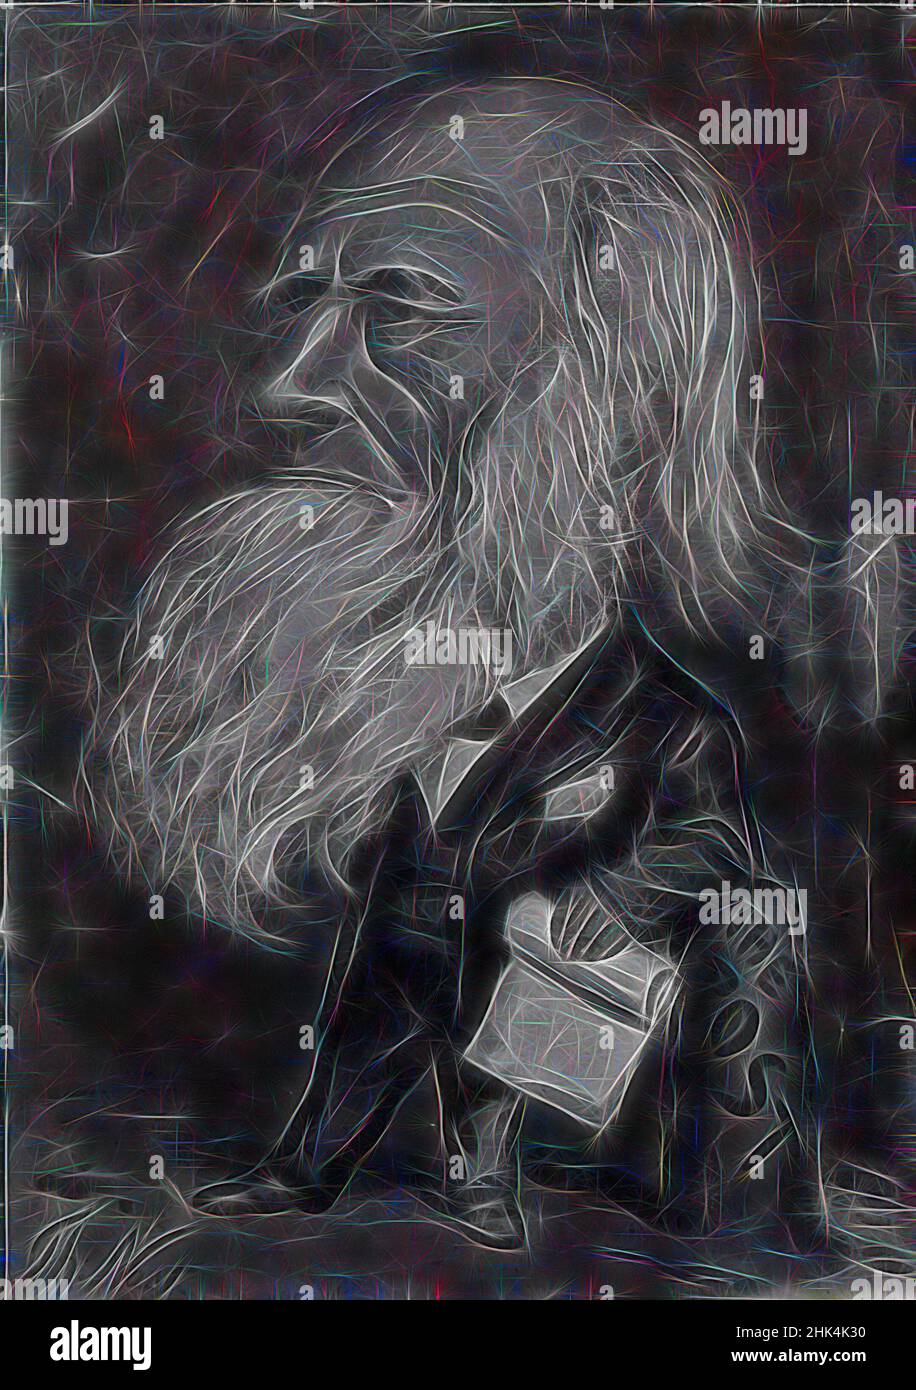 Inspired by Caricature of William Cullen Bryant, Thomas Nast, American, 1840-1902, Oil, 1866, 47 15/16 x 35 3/4 in., 121.7 x 90.8 cm, 1866, American, american art, American oil, American Painting, beard, bearded man, caricature, Caricature of William Cullen Bryant, cartoon, man, Nast, newspaper, oil, Reimagined by Artotop. Classic art reinvented with a modern twist. Design of warm cheerful glowing of brightness and light ray radiance. Photography inspired by surrealism and futurism, embracing dynamic energy of modern technology, movement, speed and revolutionize culture Stock Photo